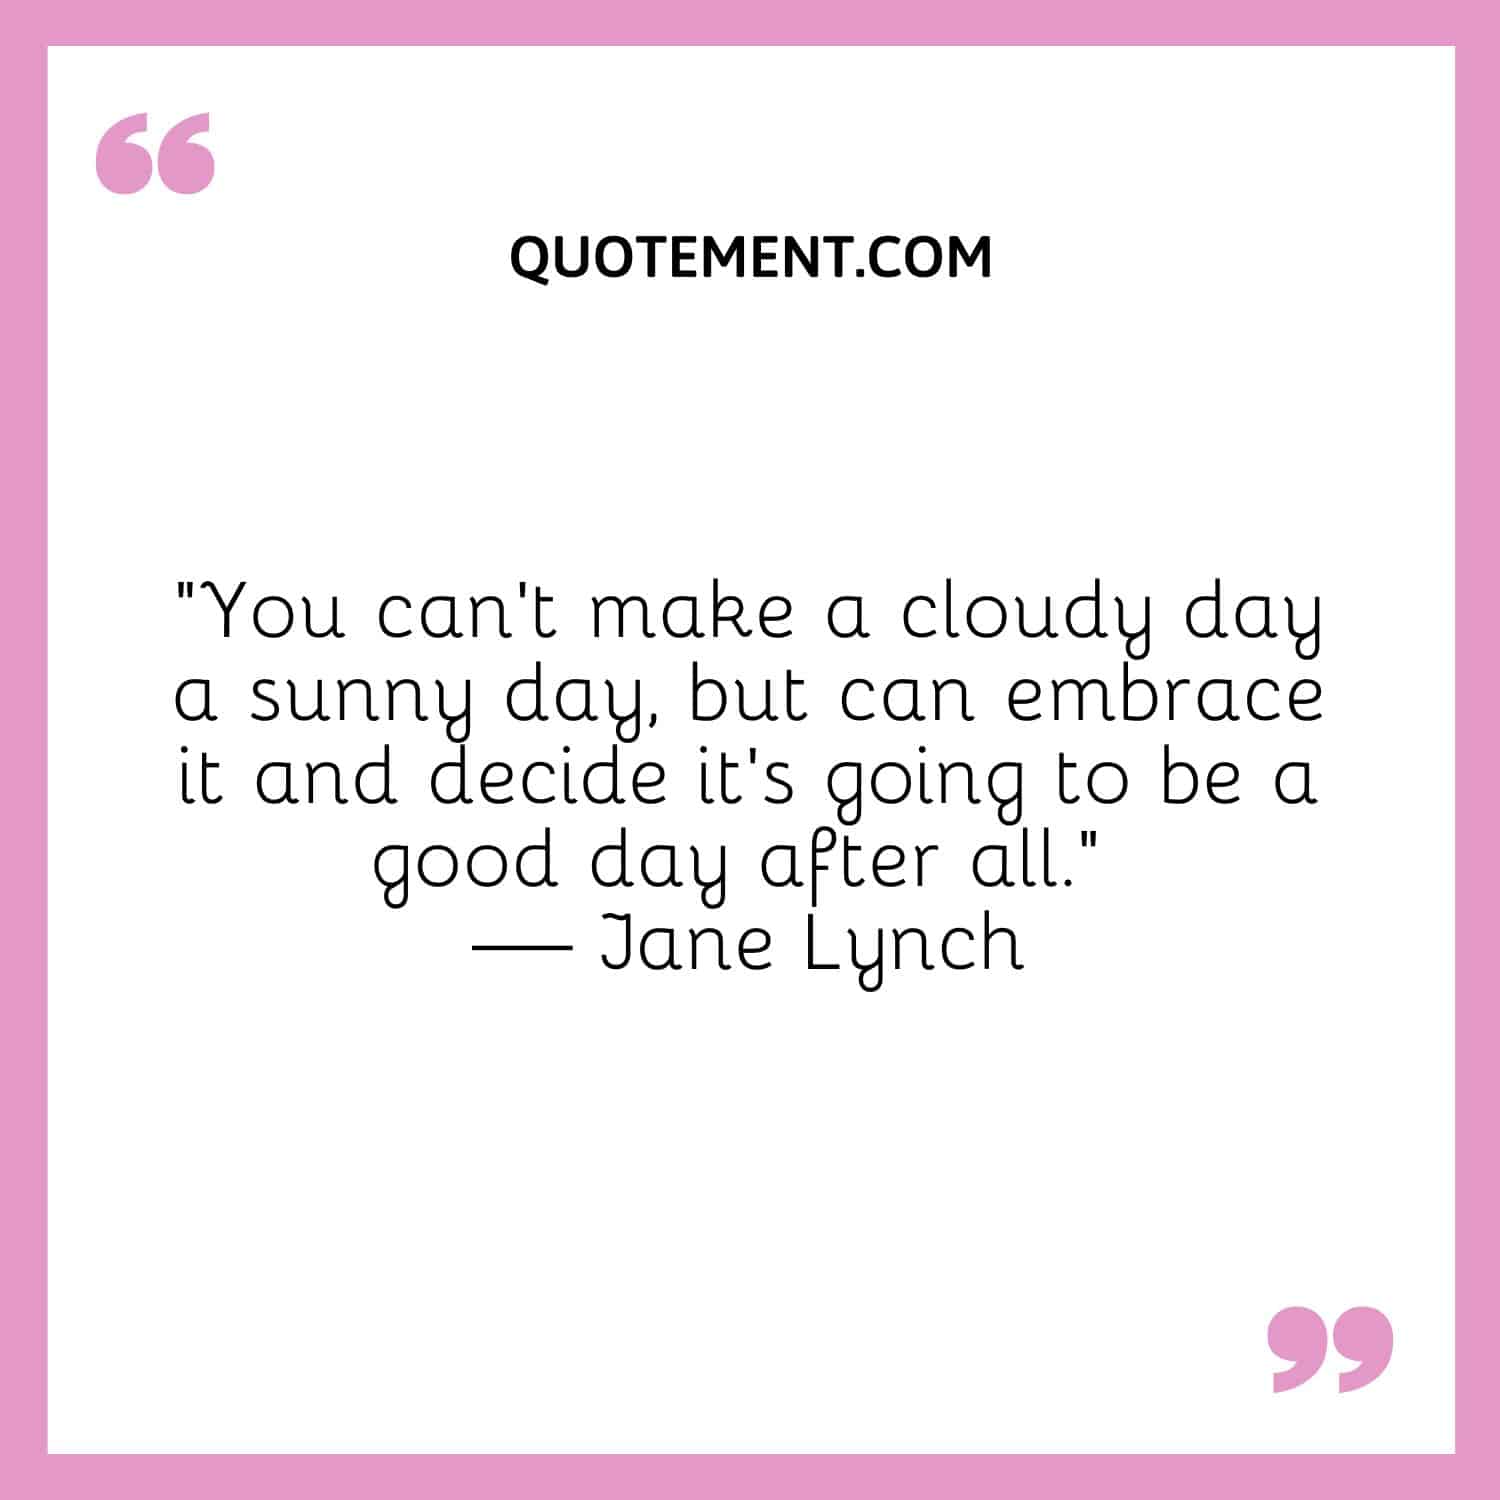 You can’t make a cloudy day a sunny day, but can embrace it and decide it’s going to be a good day after all